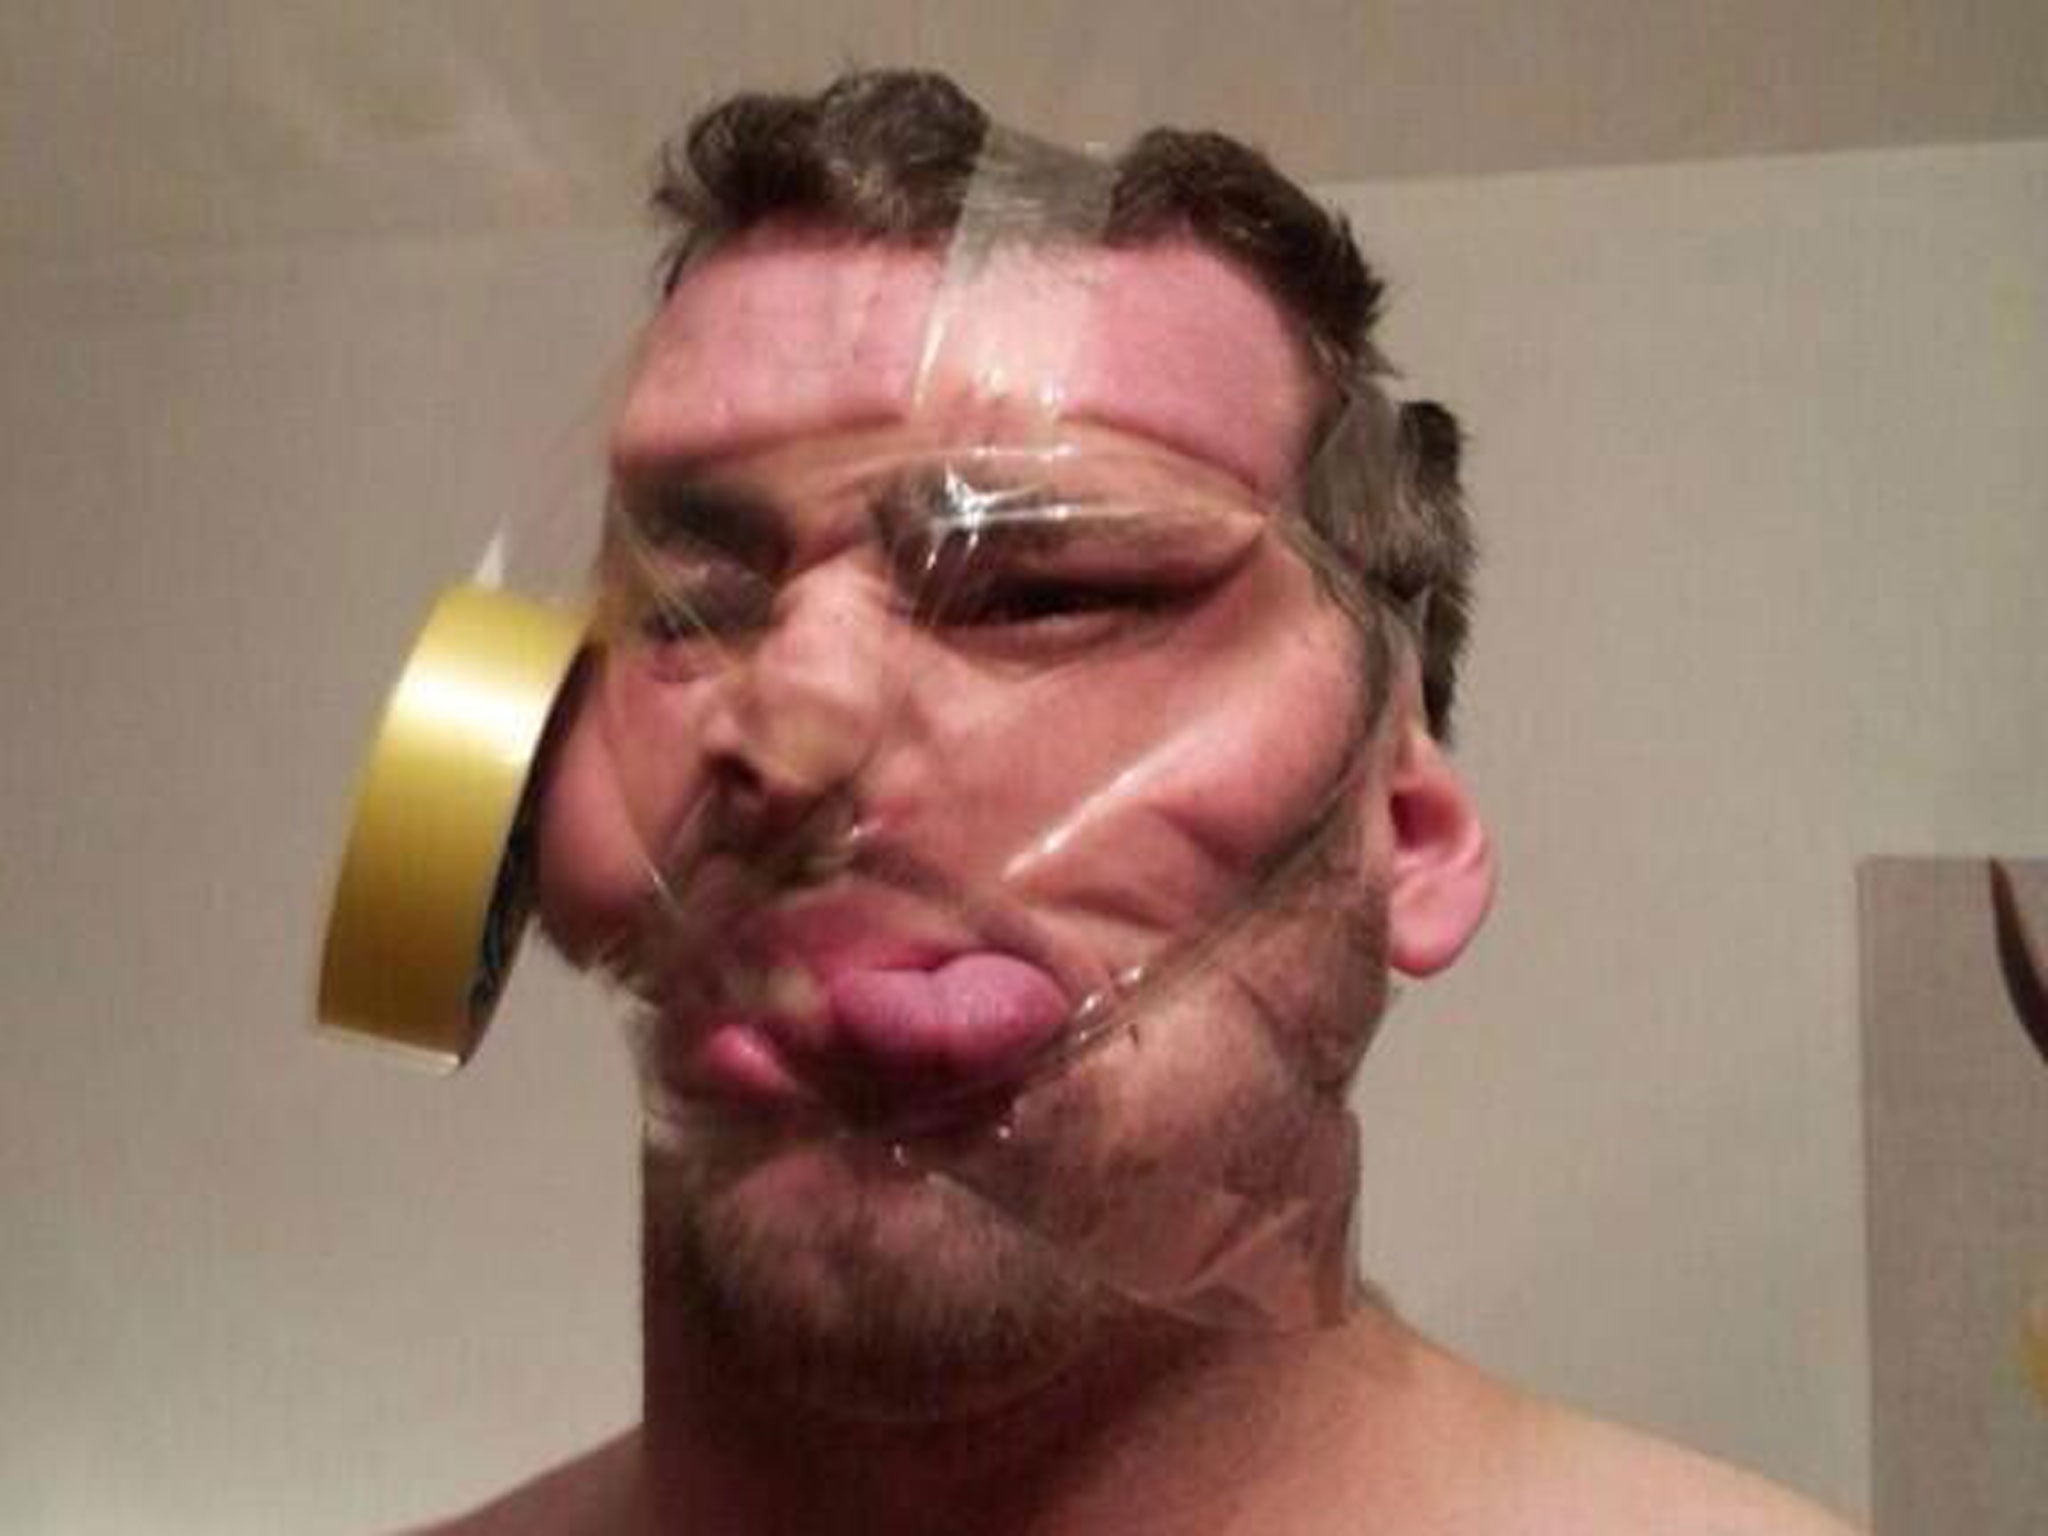 Sellotape Selfies Take Over From No Makeup Selfie As The Latest Online Trend Uk News